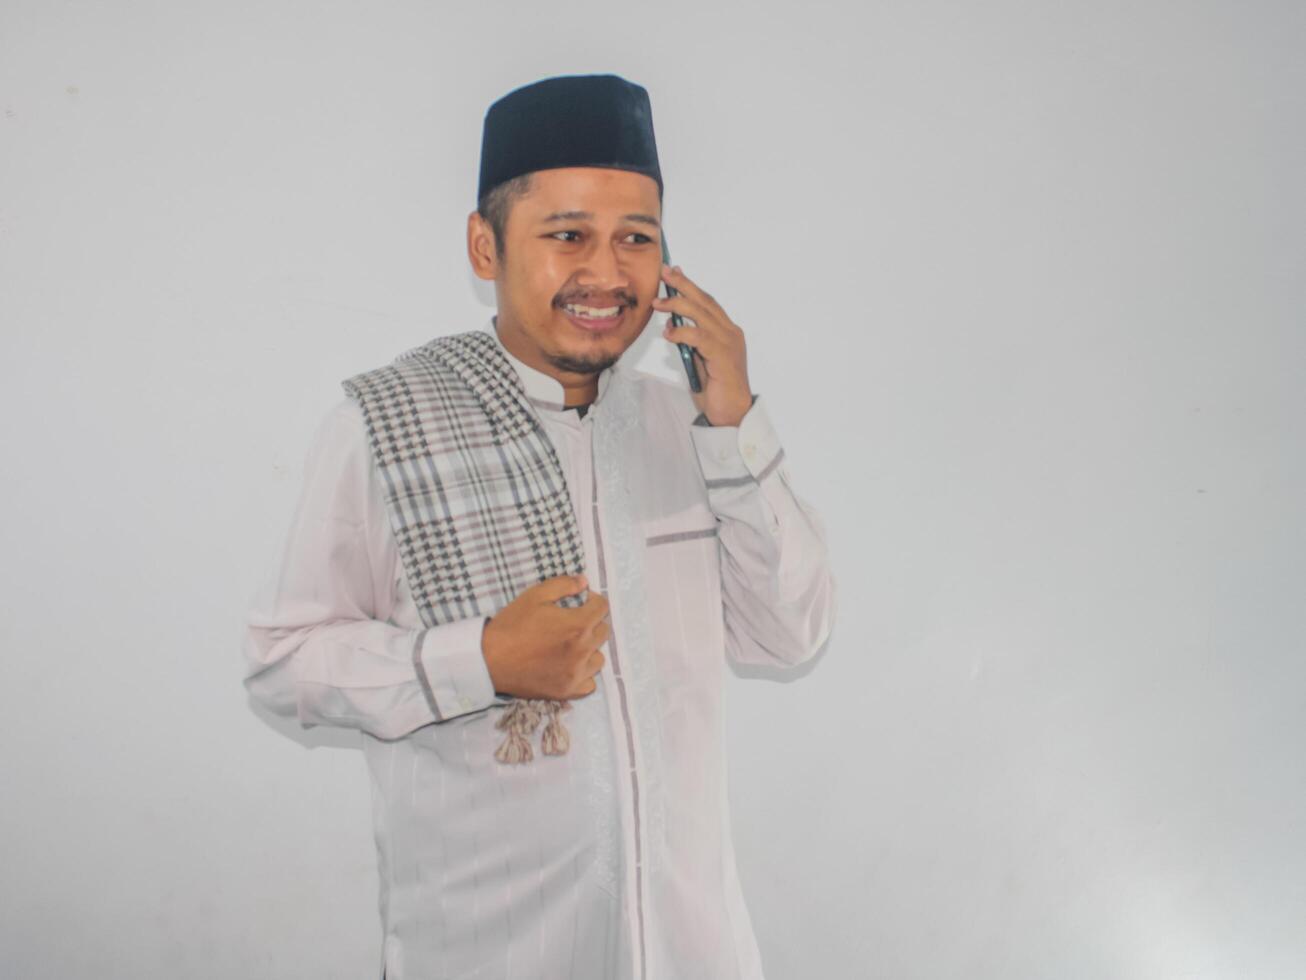 Moslem Asian man smiling happy while answering a phone call photo